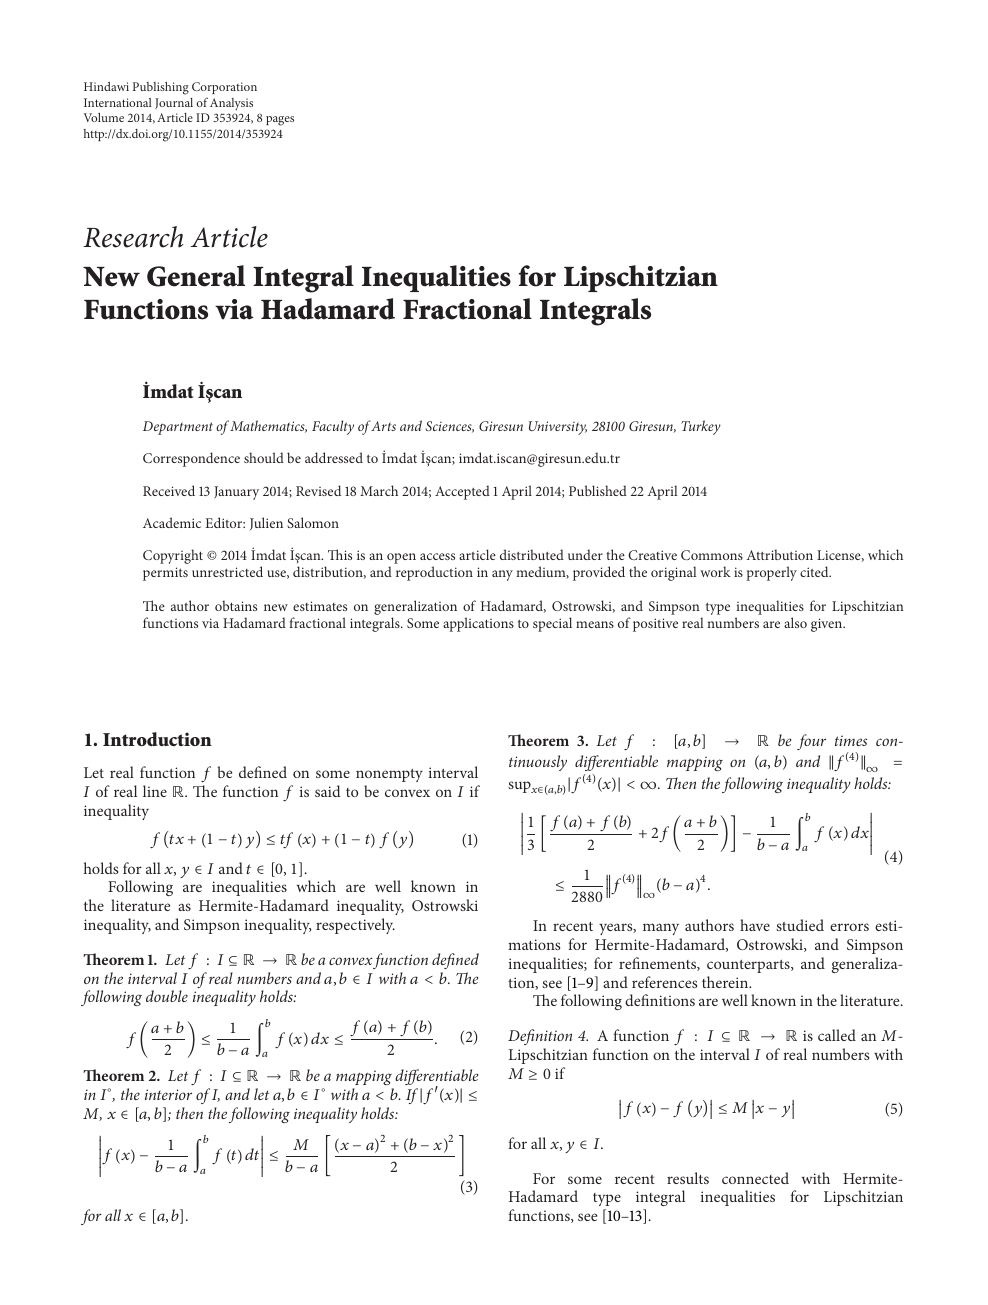 New General Integral Inequalities For Lipschitzian Functions Via Hadamard Fractional Integrals Topic Of Research Paper In Mathematics Download Scholarly Article Pdf And Read For Free On Cyberleninka Open Science Hub